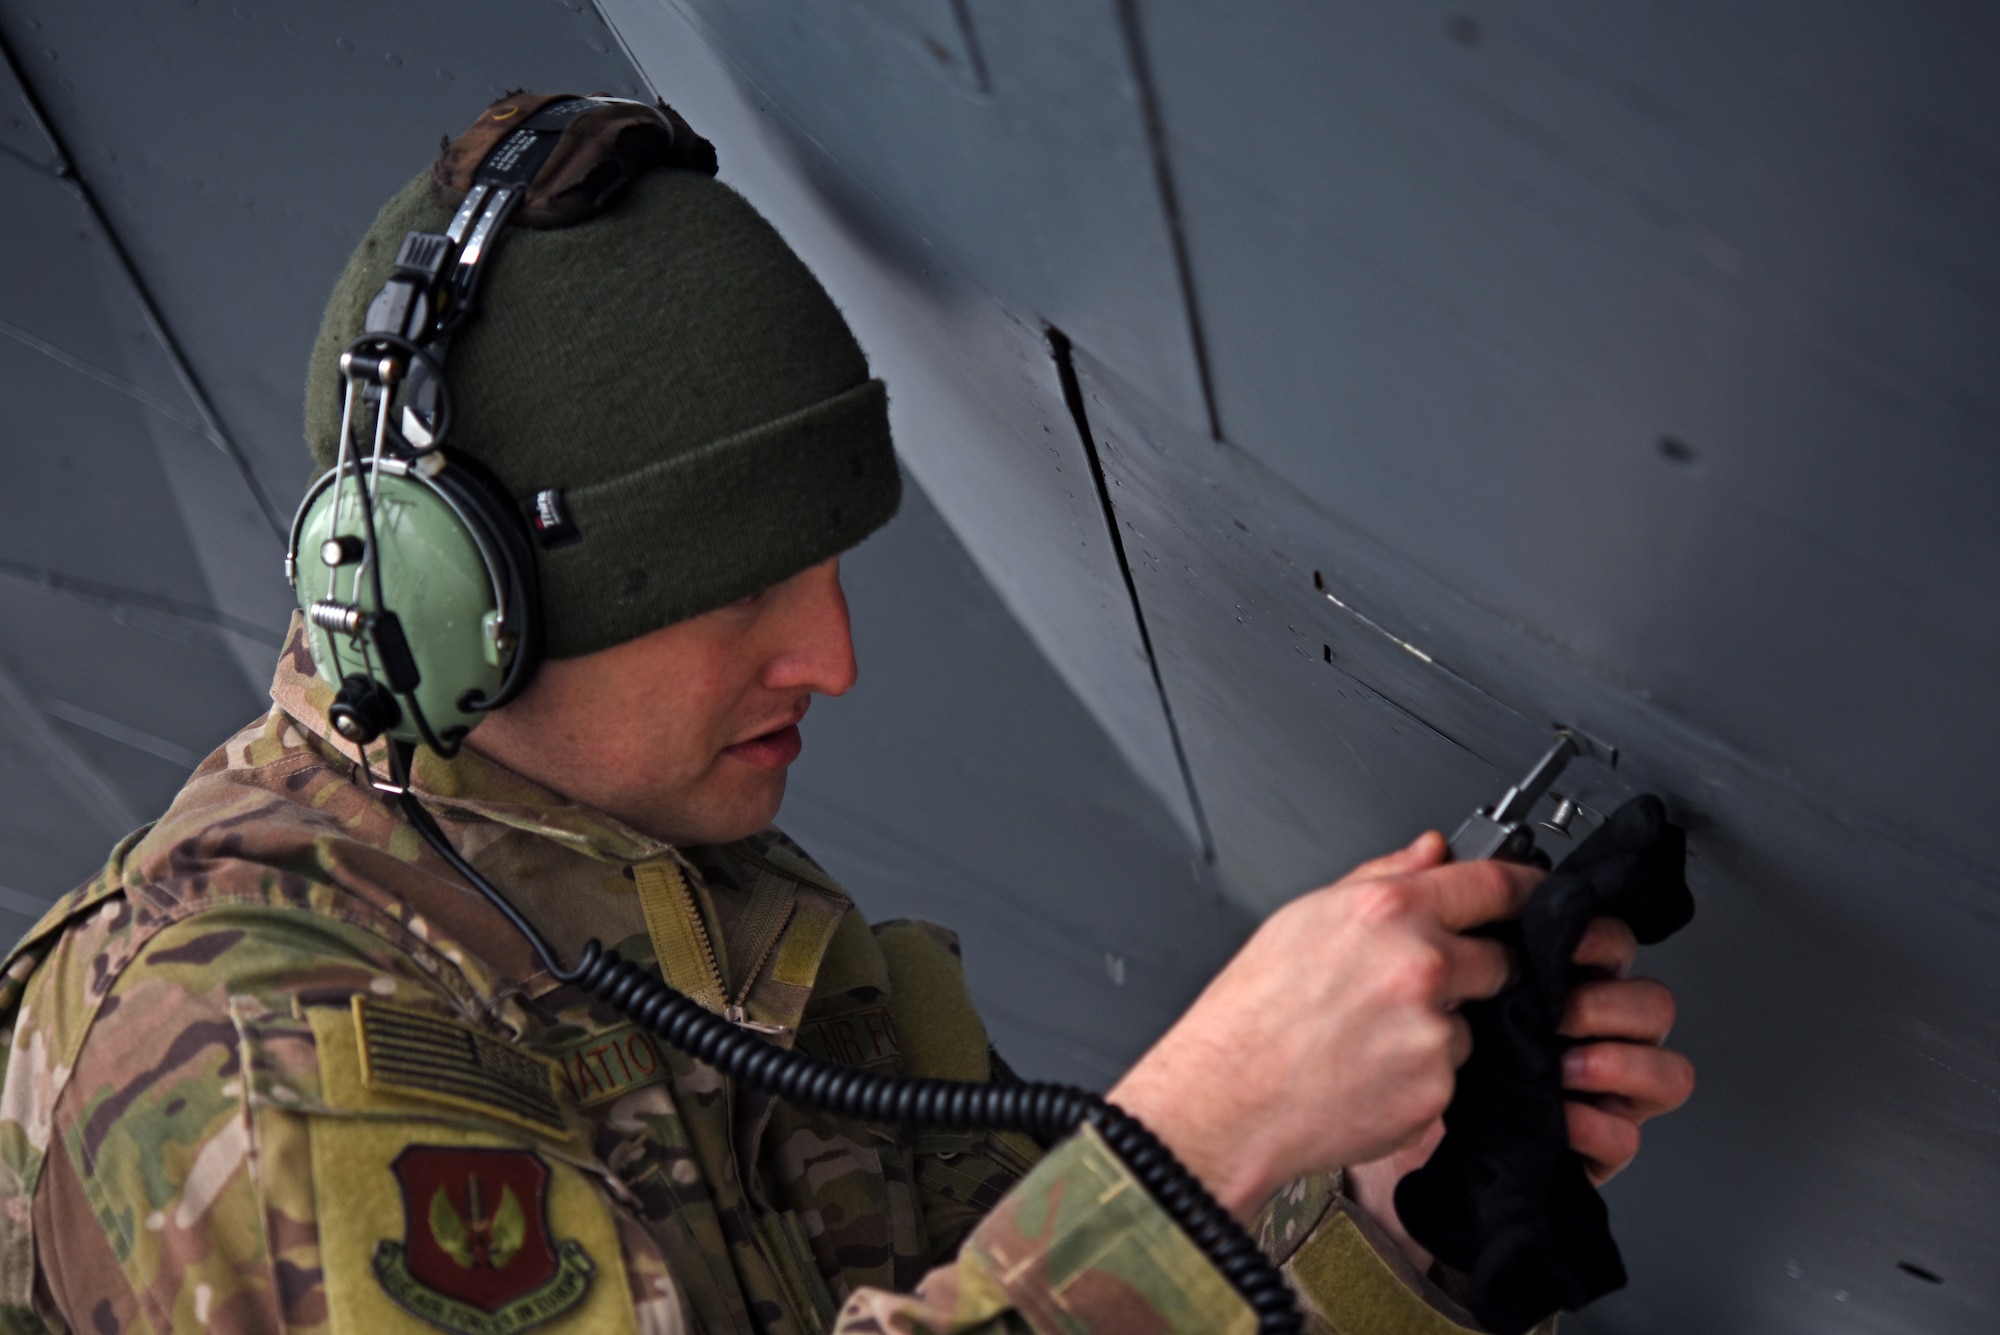 U.S. Air Force Staff Sgt. Shannon Nations, 100th Aircraft Maintenance Squadron flying crew chief, preps a KC-135 Stratotanker from RAF Mildenhall prior to take-off for refueling training with Romanian air force F-16s in Bucharest, Romania, March 12, 2019. The training was an example of U.S. and NATO allies sharing a commitment to promote peace and stability through developing their relationship and communication process. (U.S. Air Force photo by Airman 1st Class Brandon Esau)